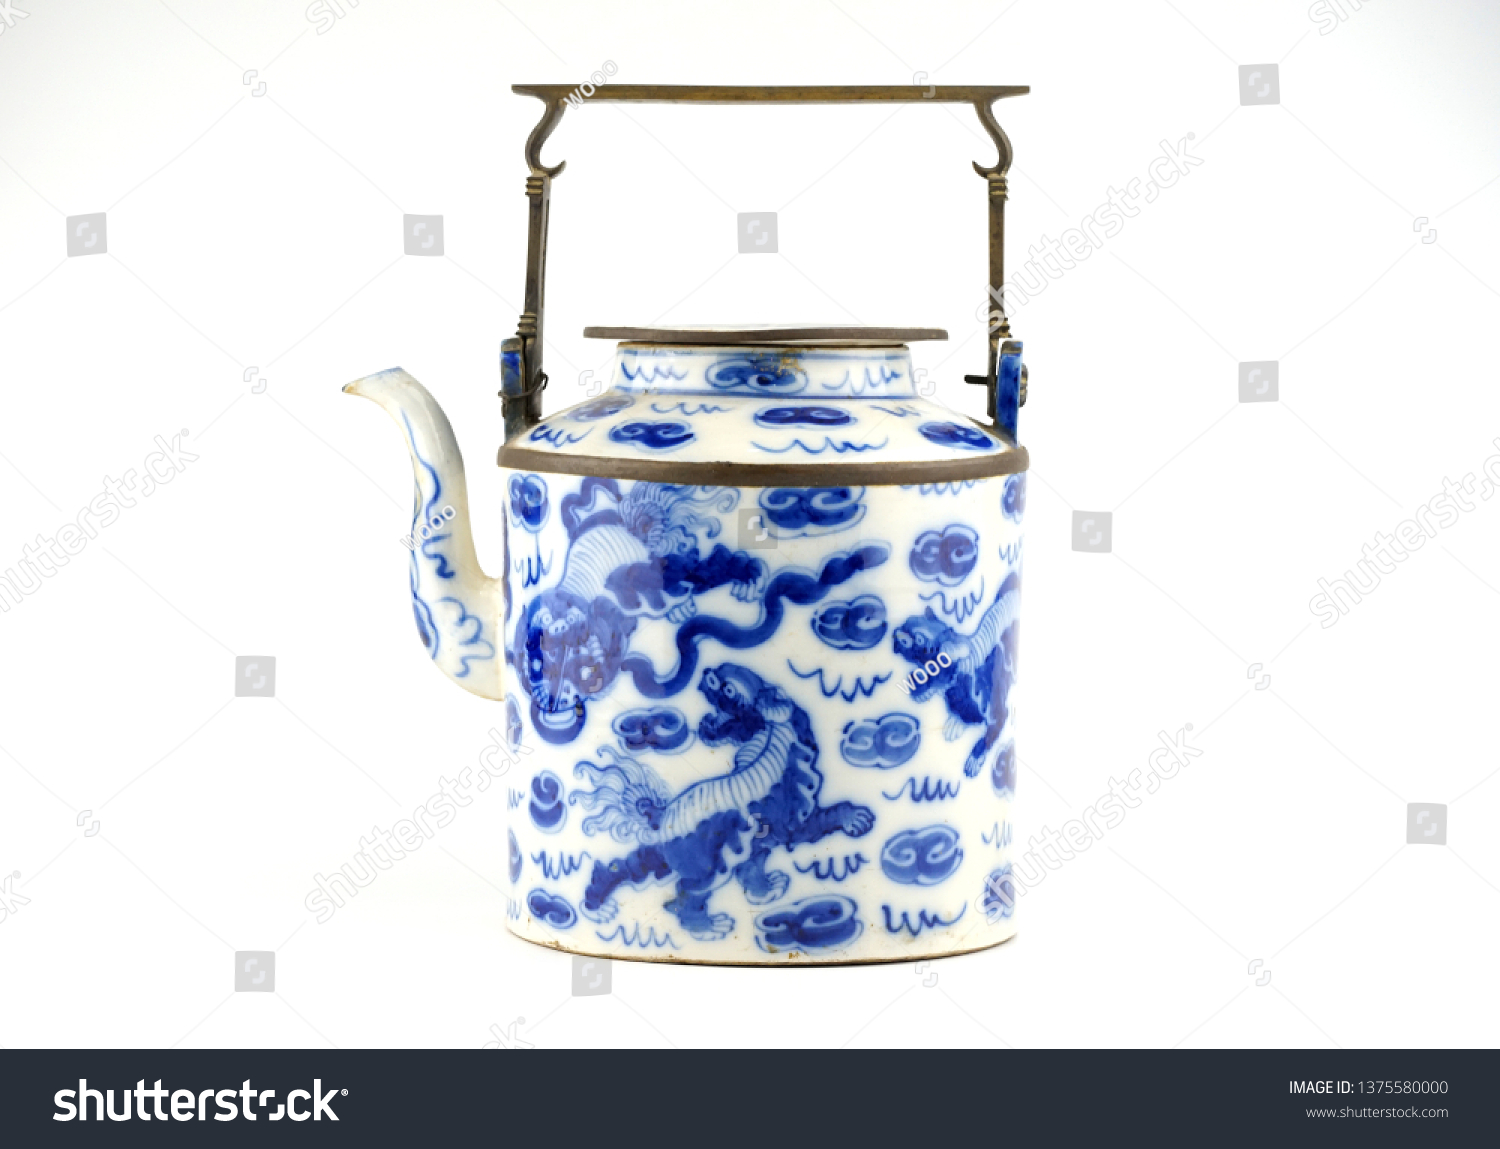 Antique Objects on white background. #1375580000